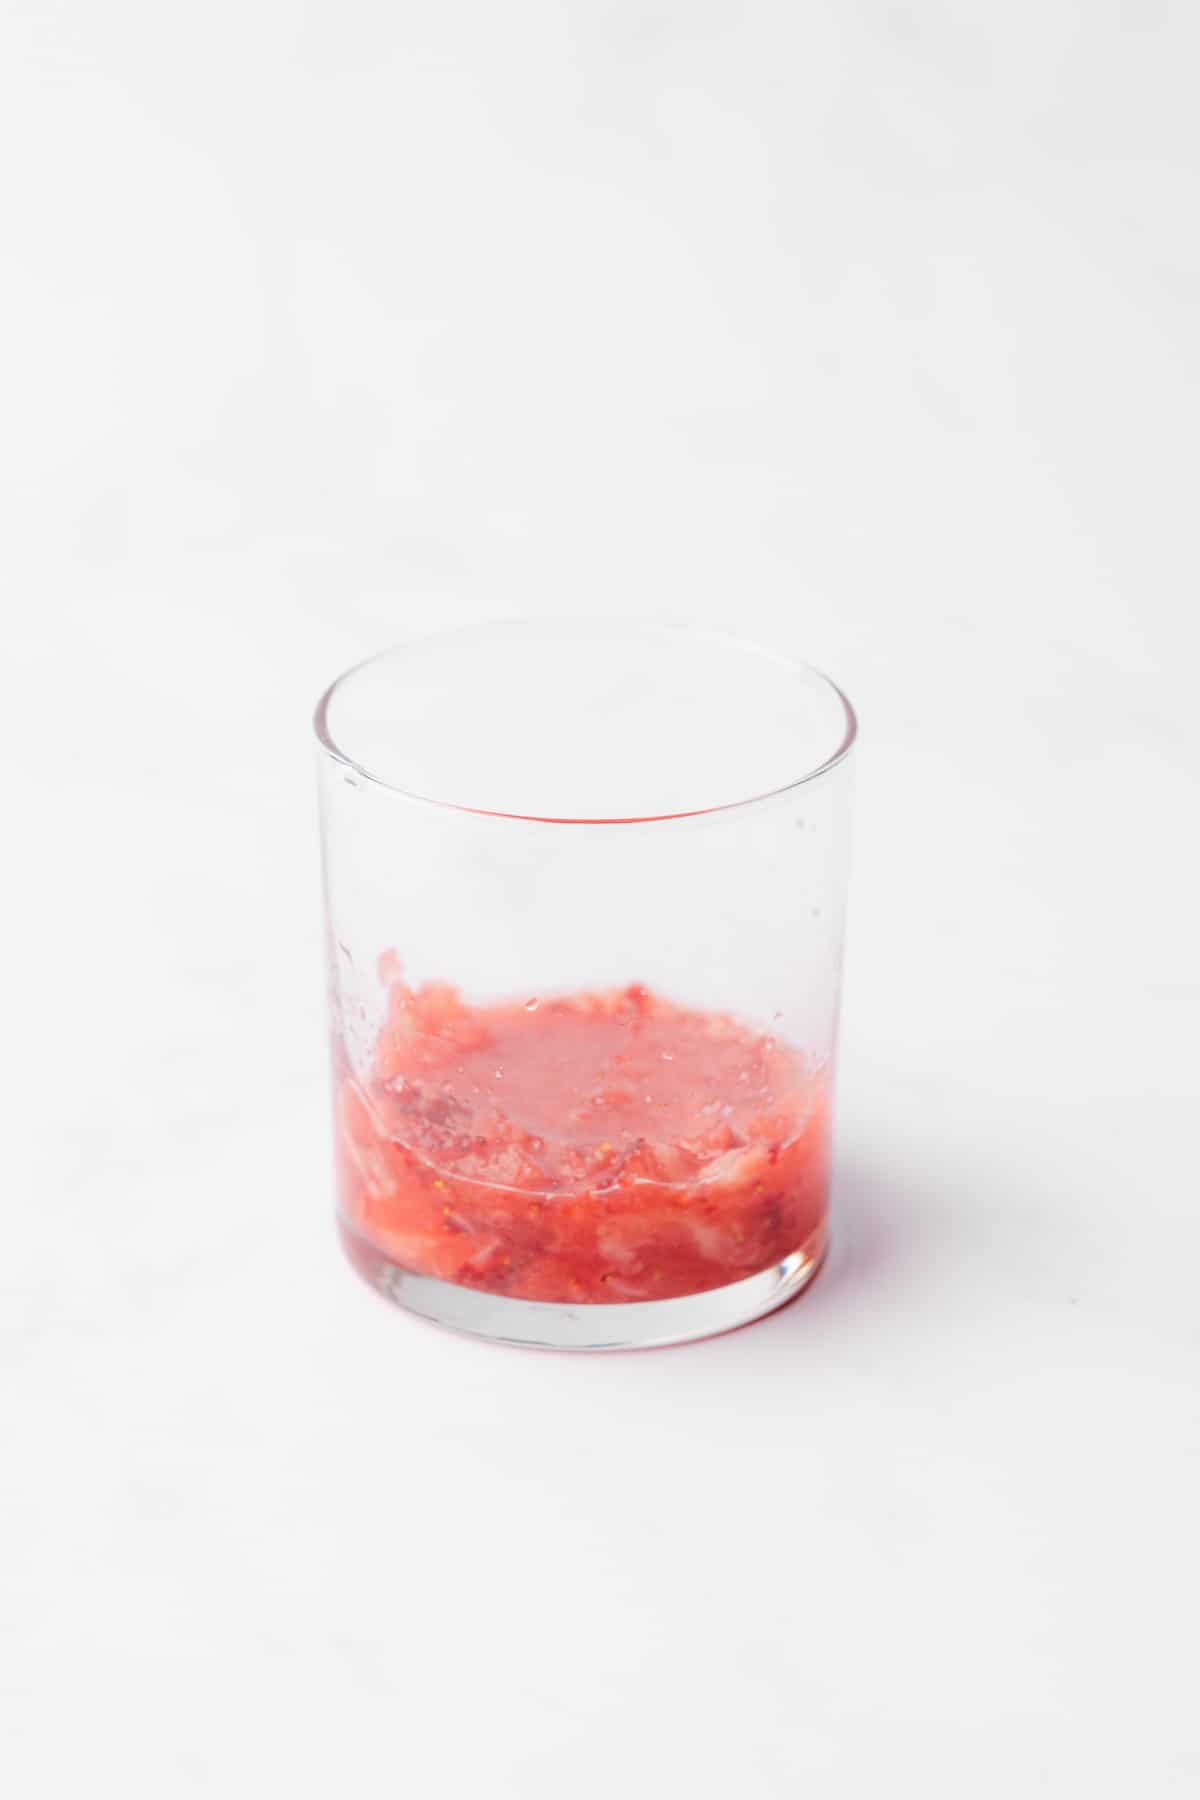 muddled watermelon and strawberry in the bottom of a glass